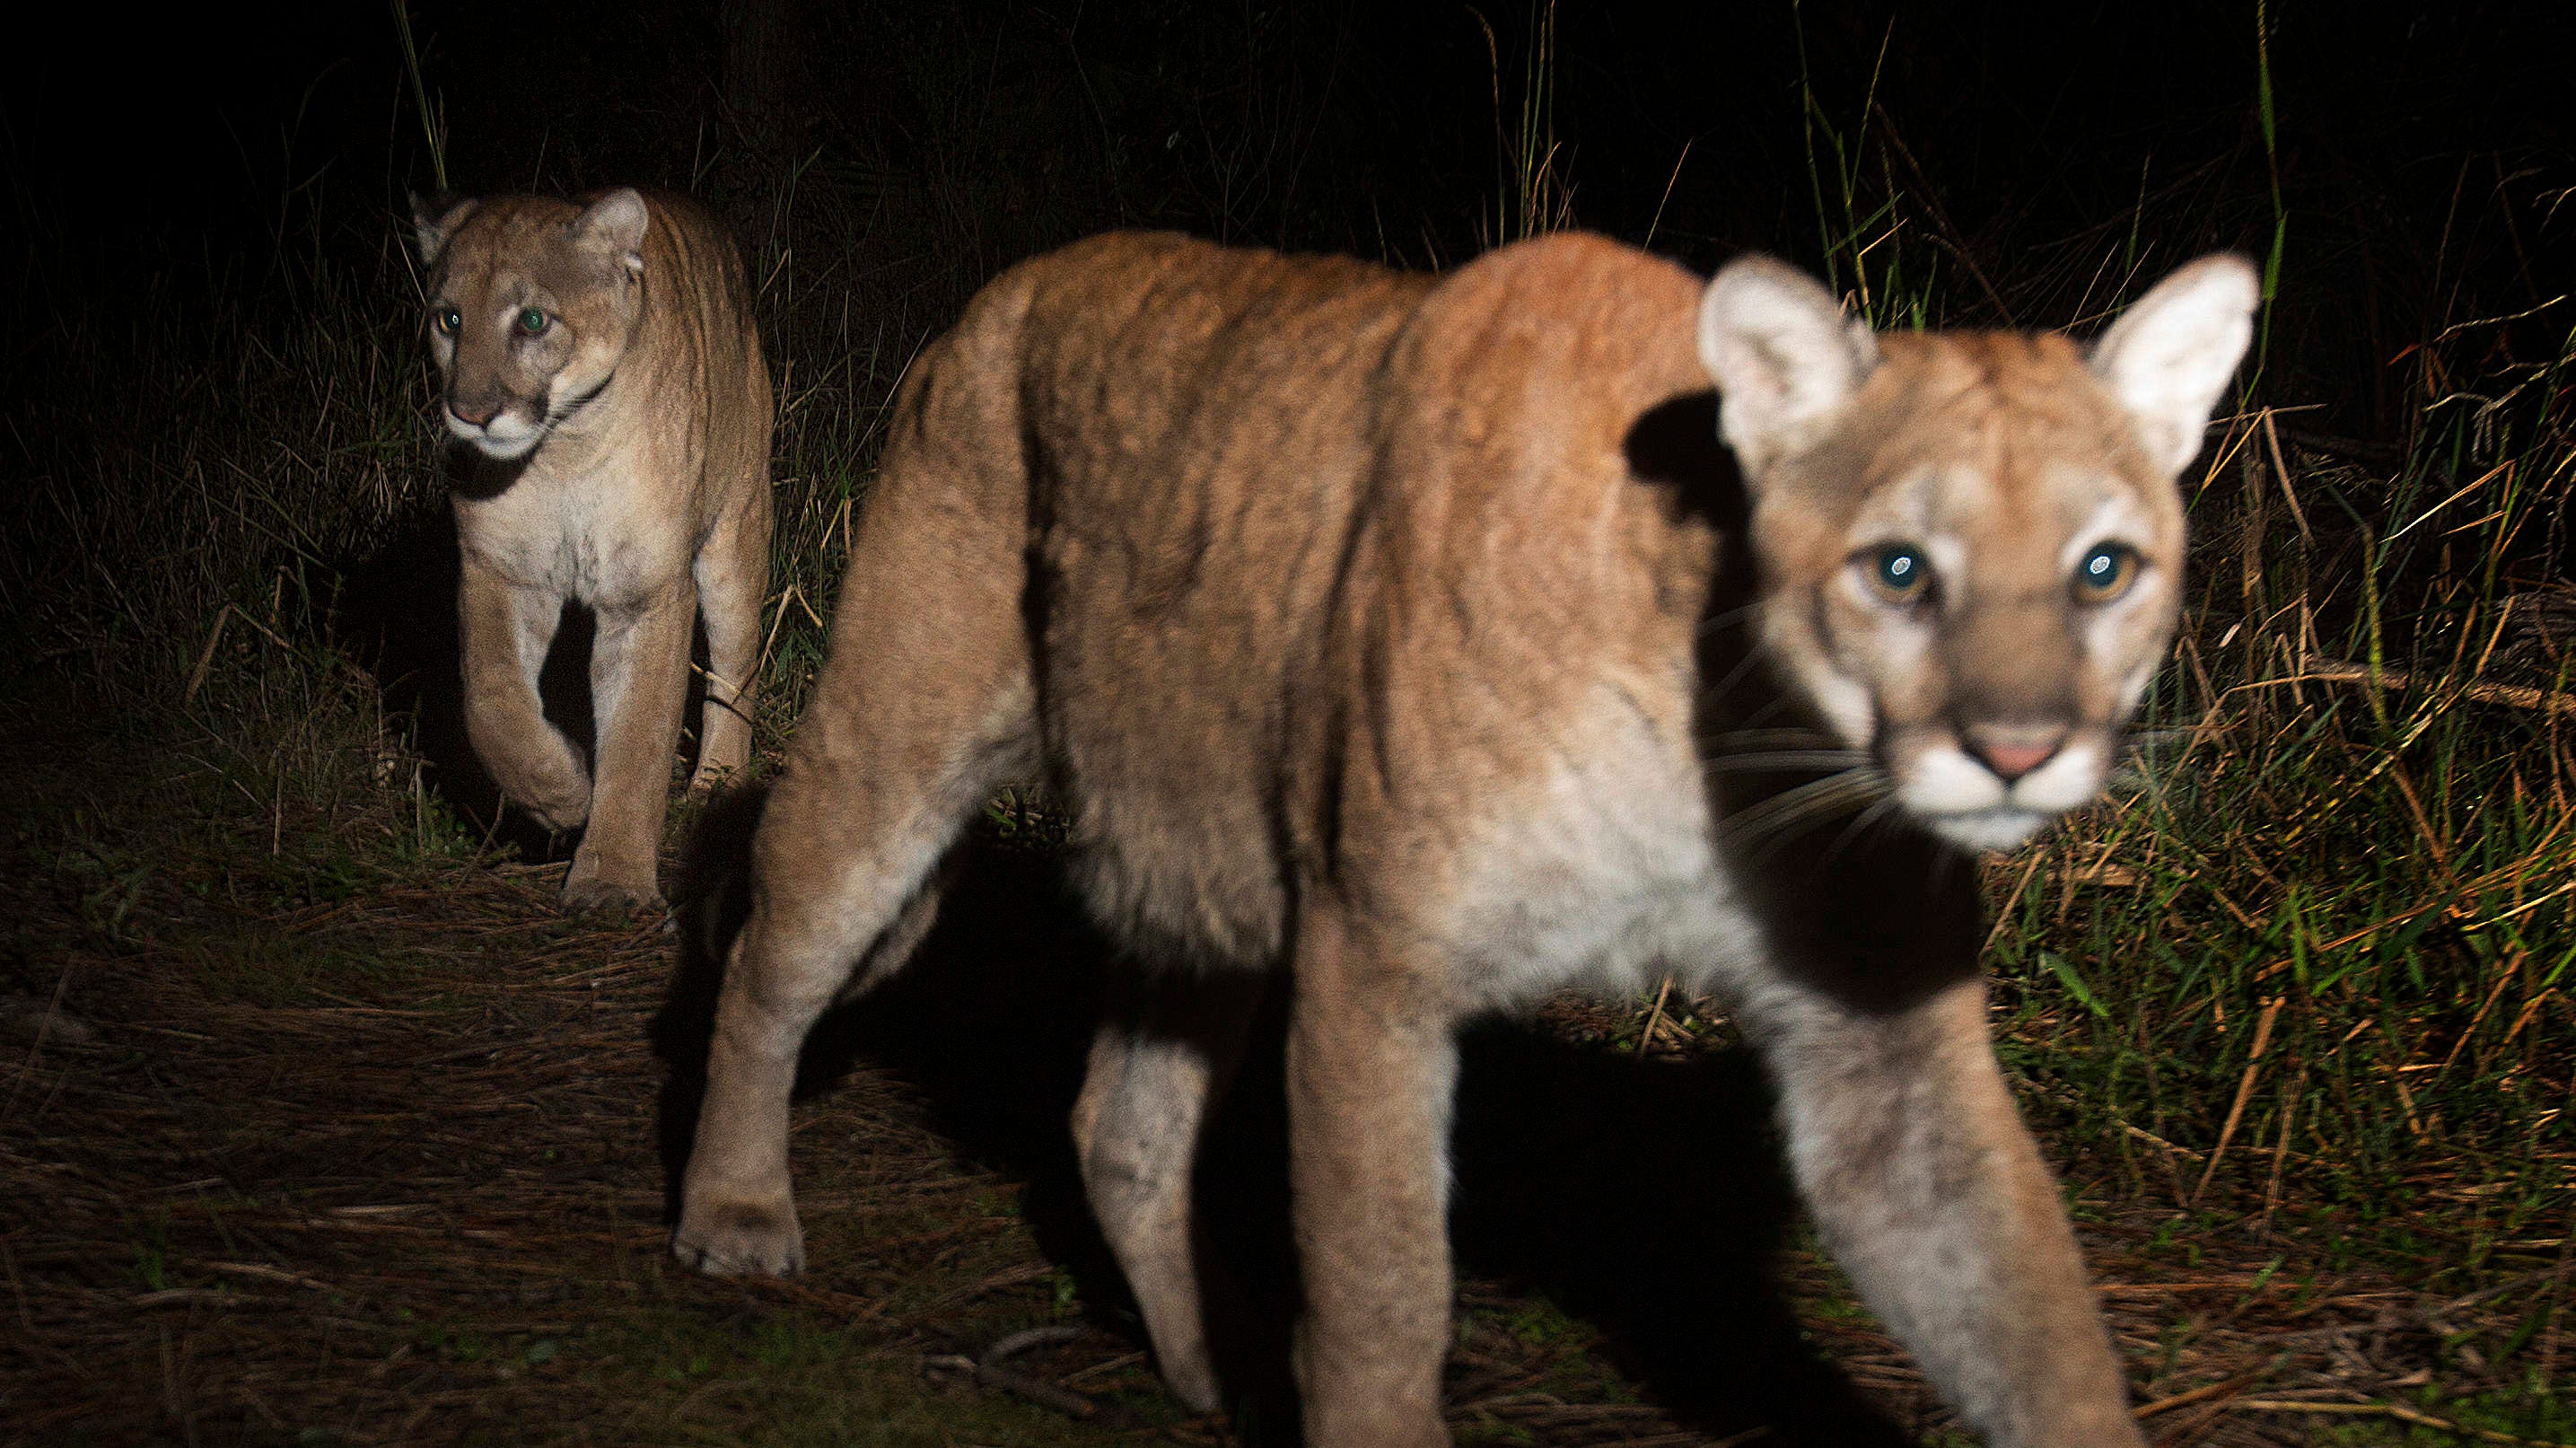 Florida panthers prey on pets, livestock is SWFL